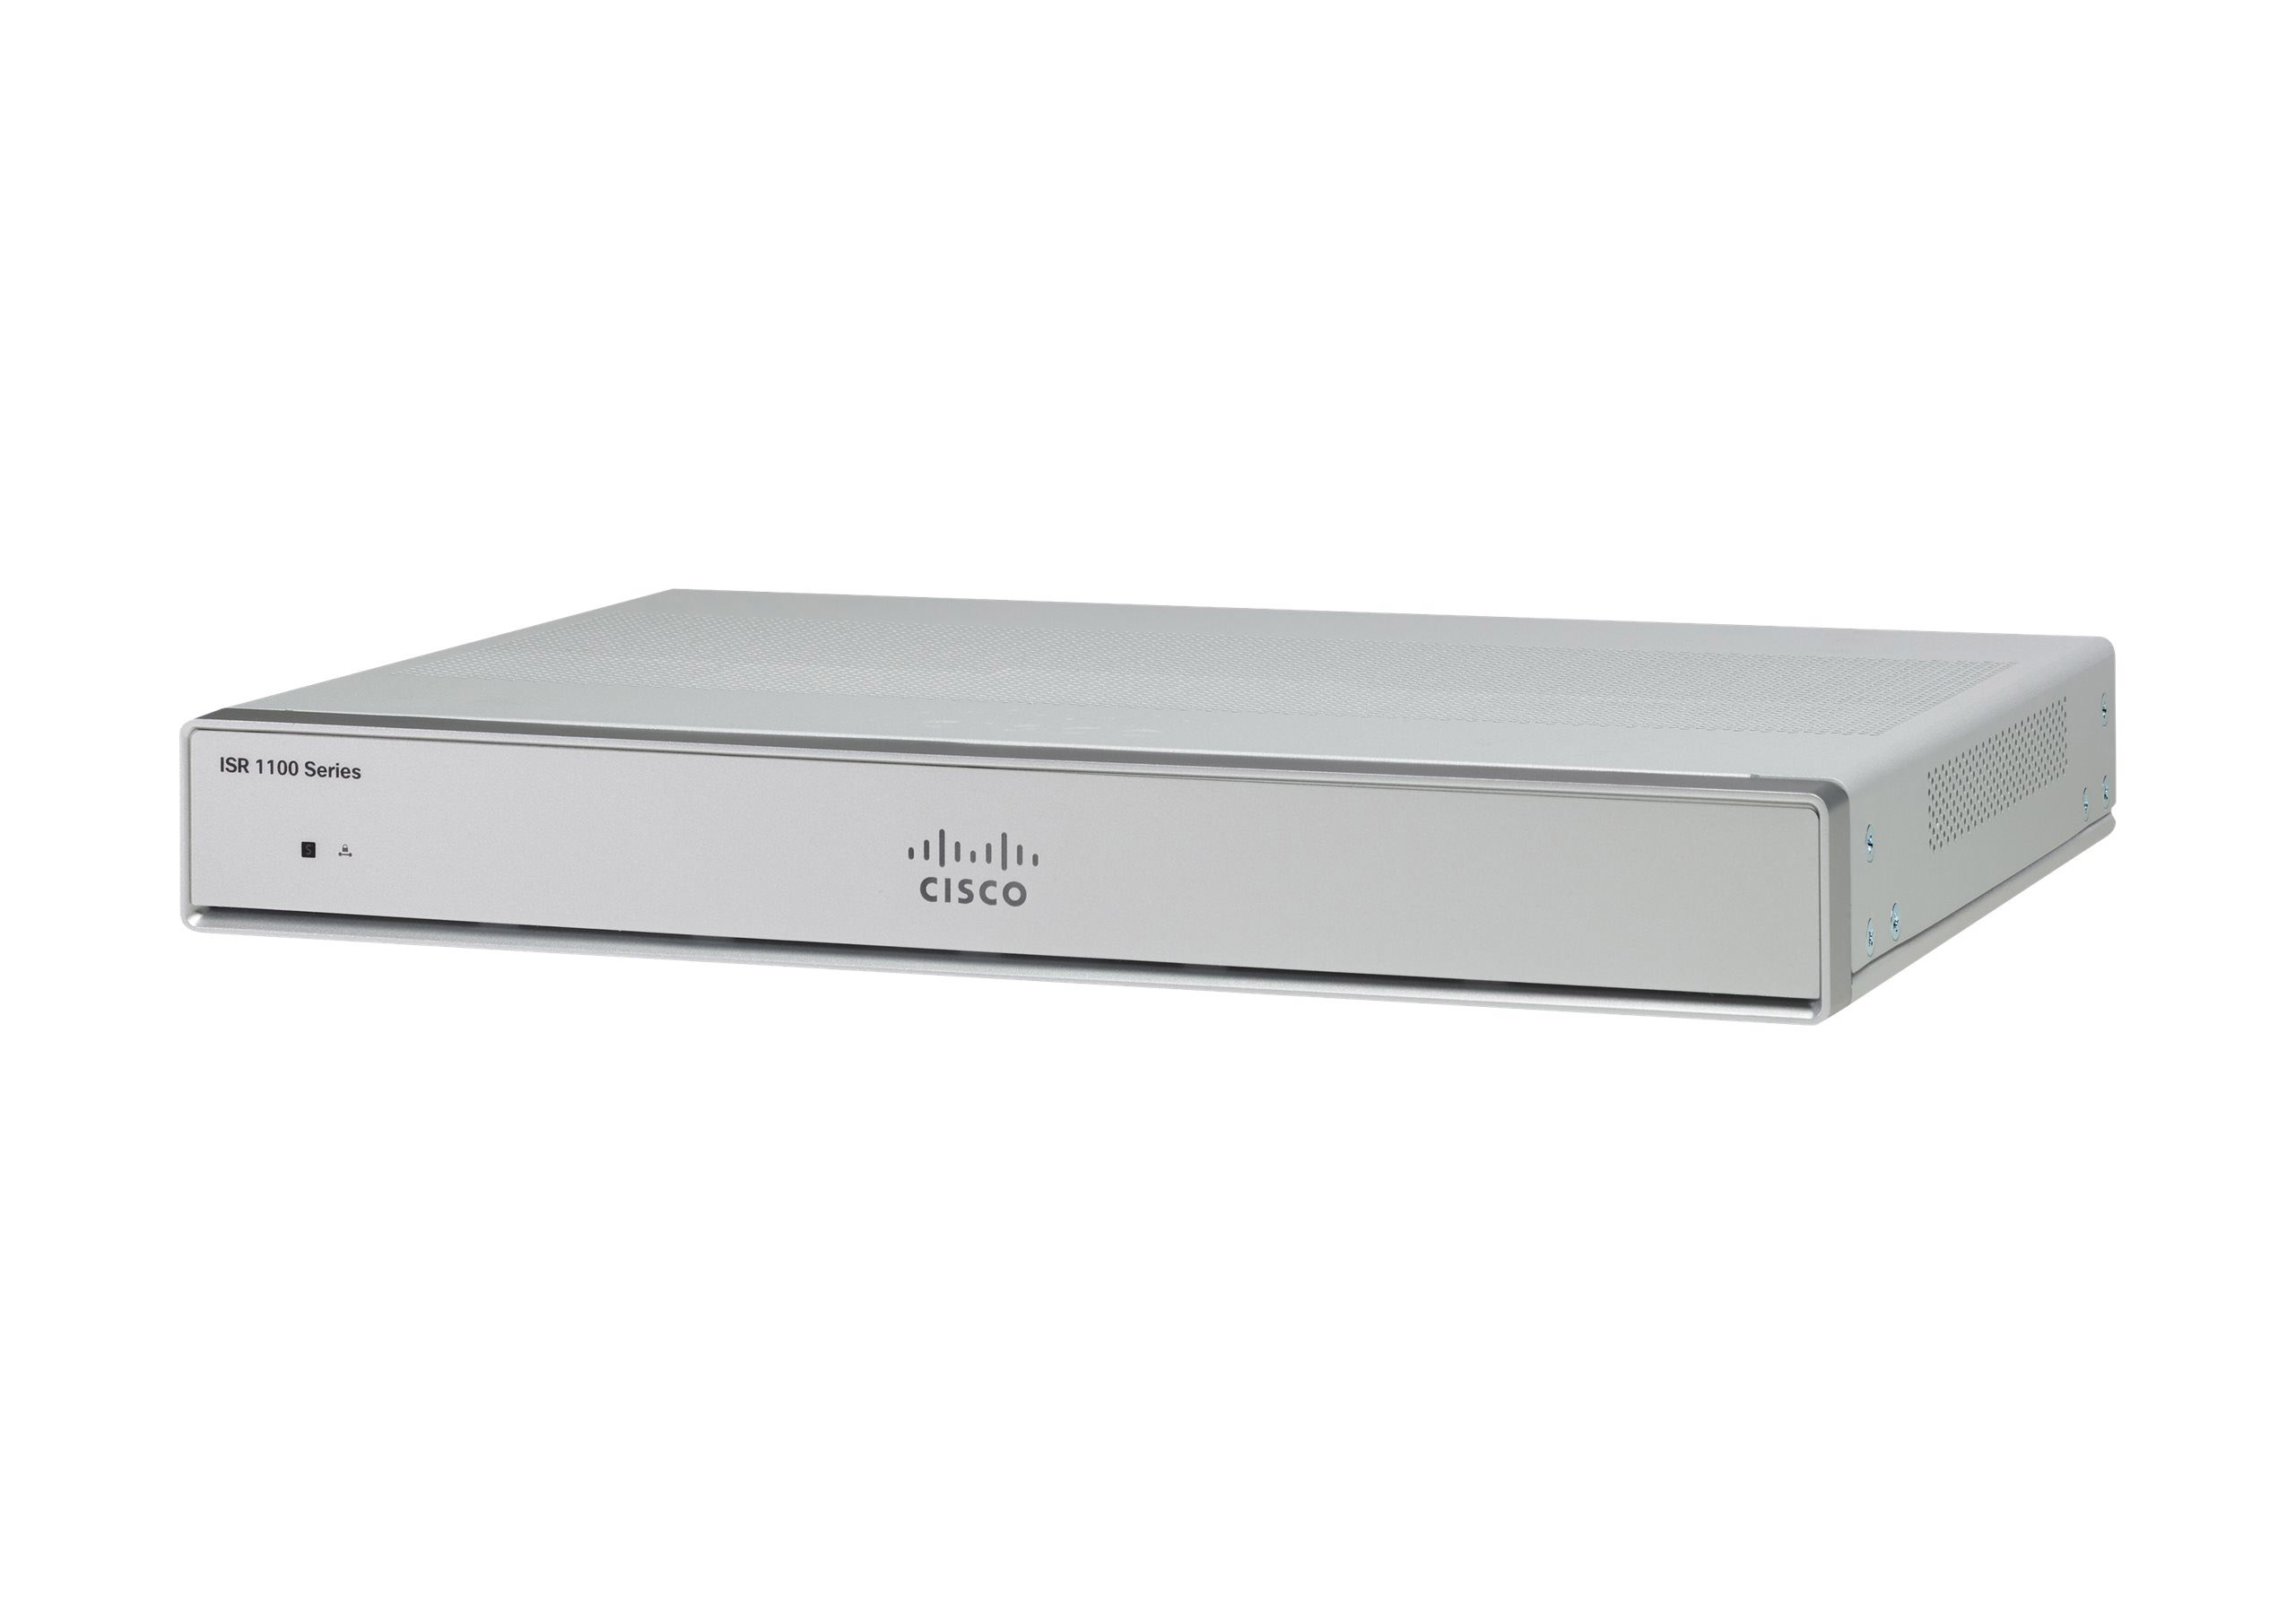 CISCO ISR 1100 4 Ports Dual GE WAN Ethernet Router, C1111-4P